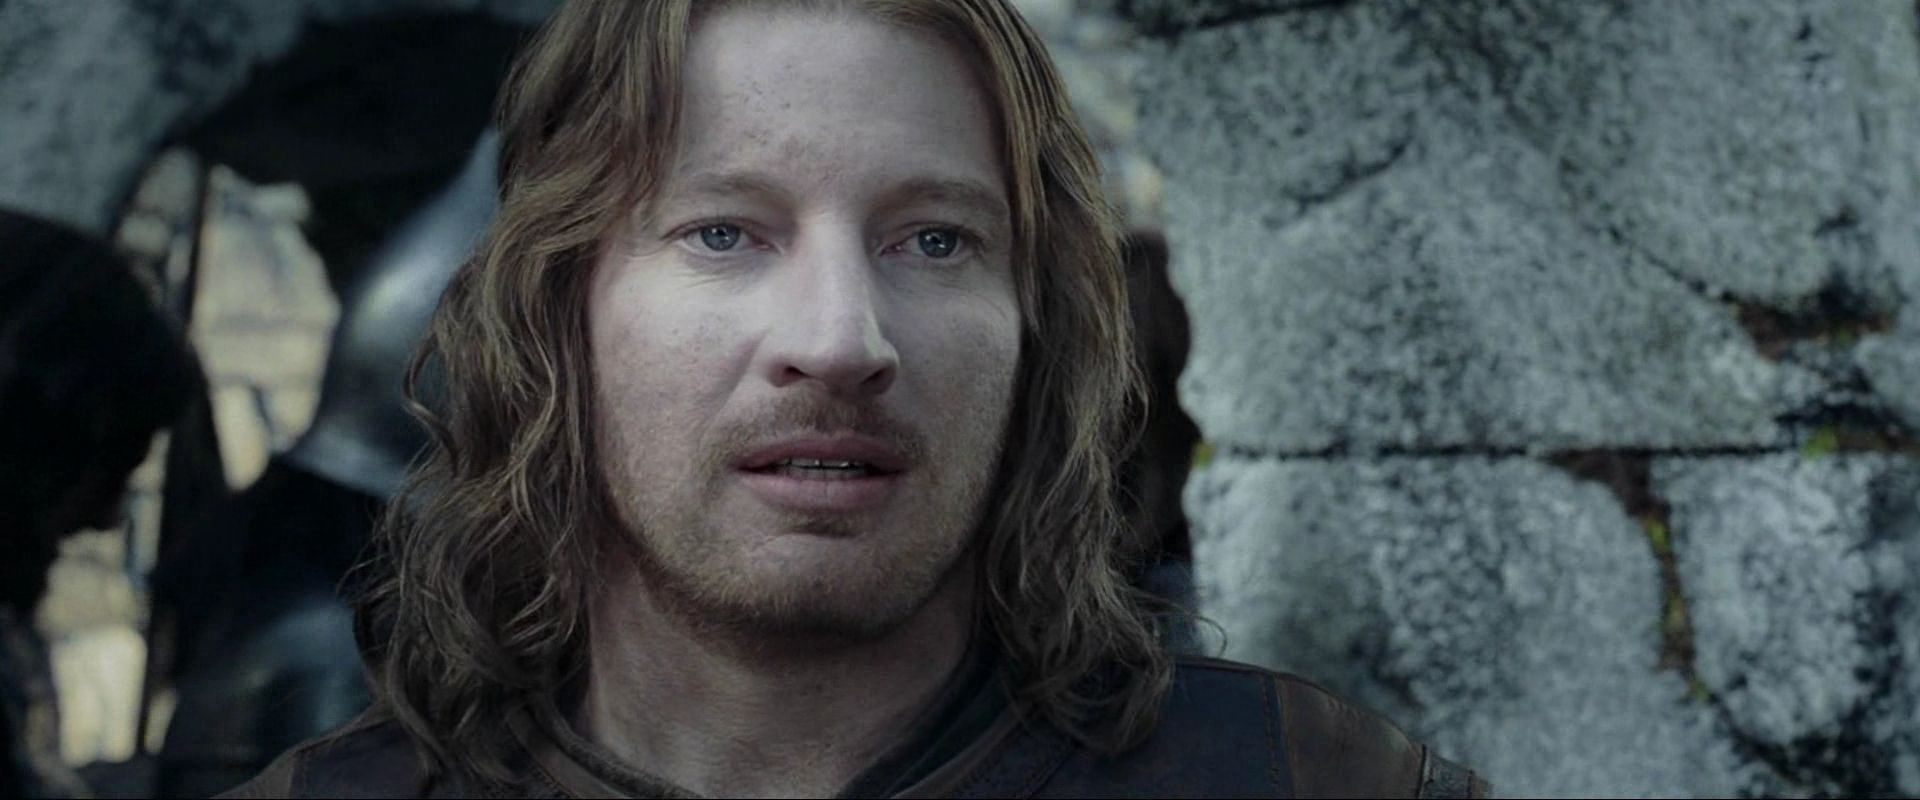 Lord Of The Rings’ Faramir Change Was Good For The Two Towers